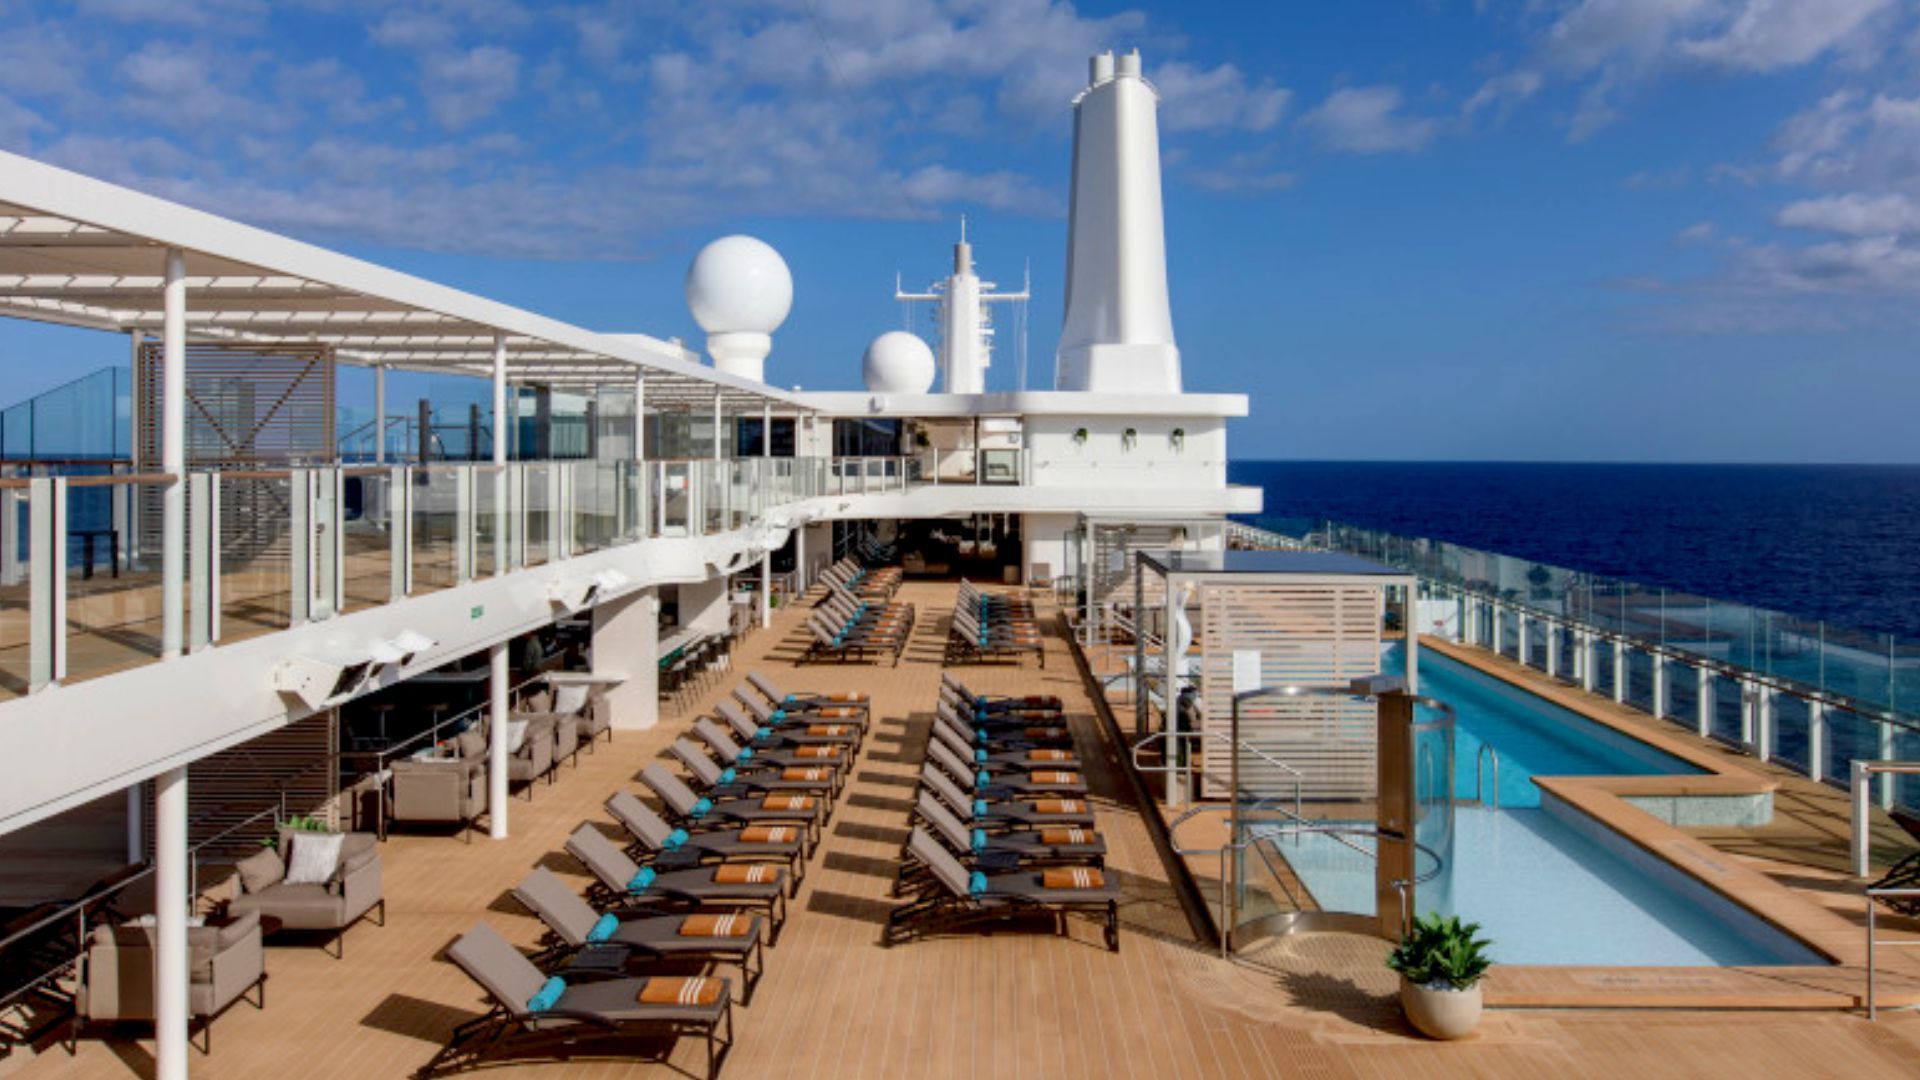 there is a large swimming pool on the deck of a cruise ship, Silver Nova